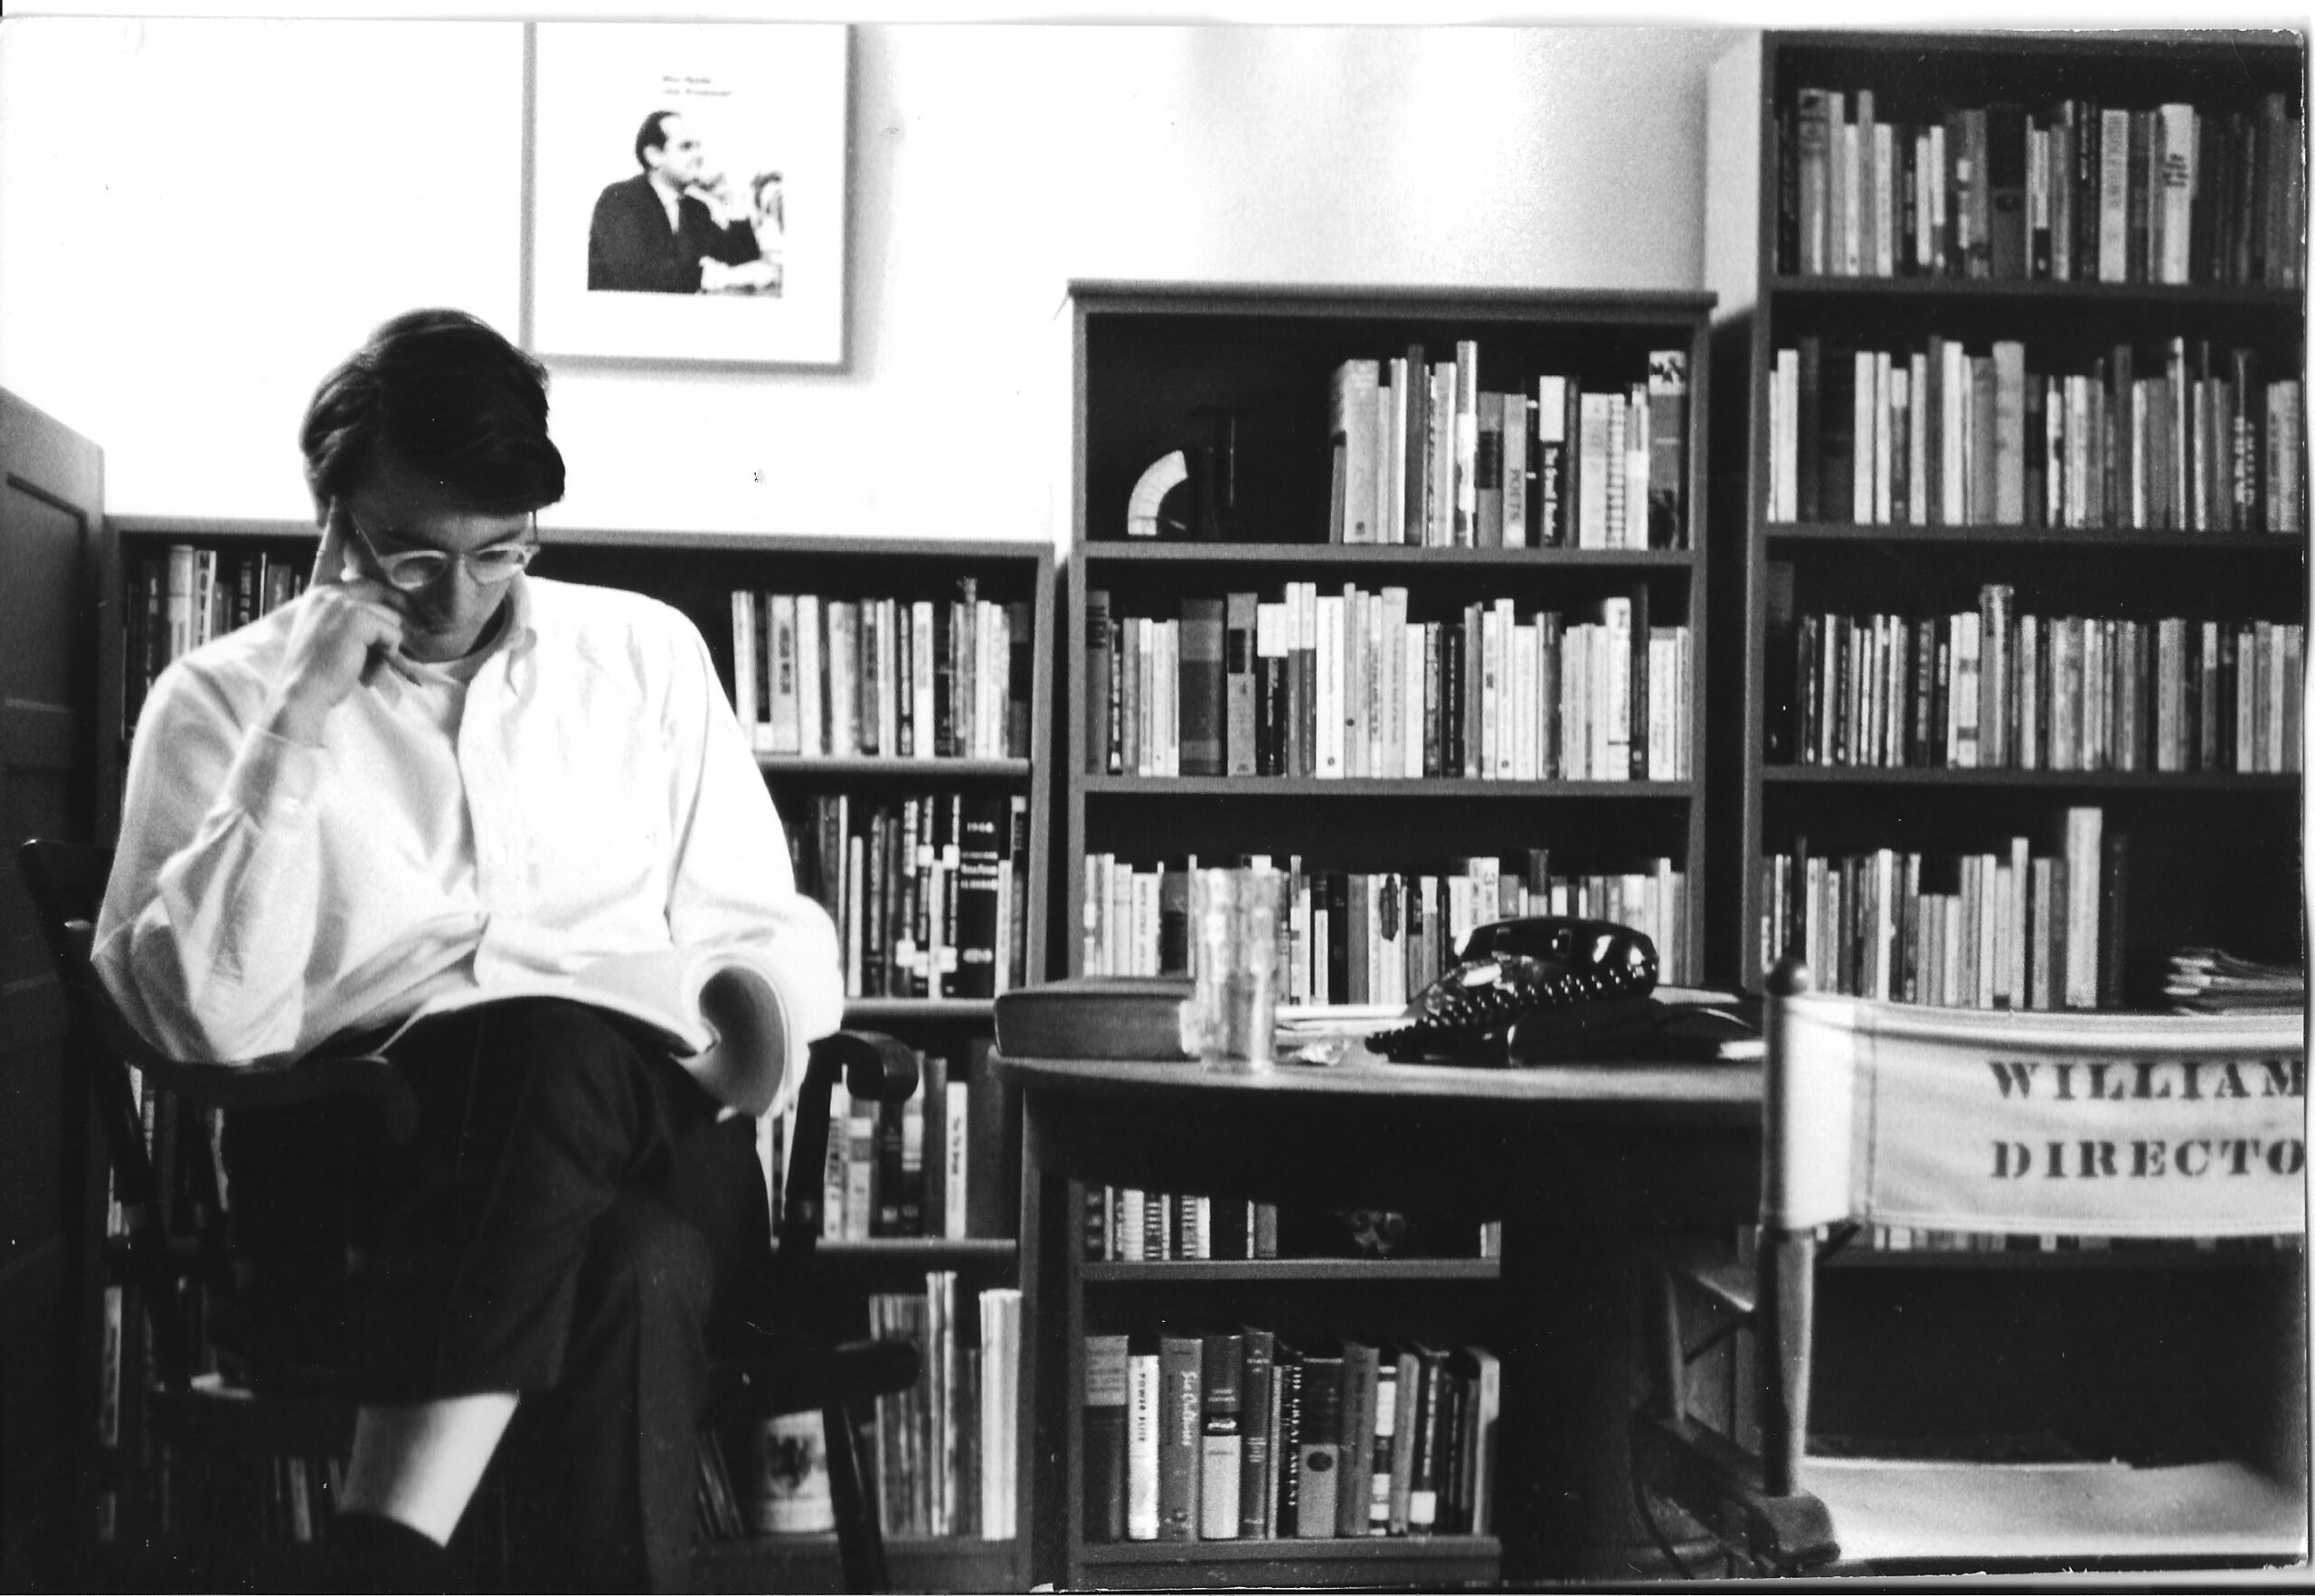 Black and white photo of Paul Williams in his study.